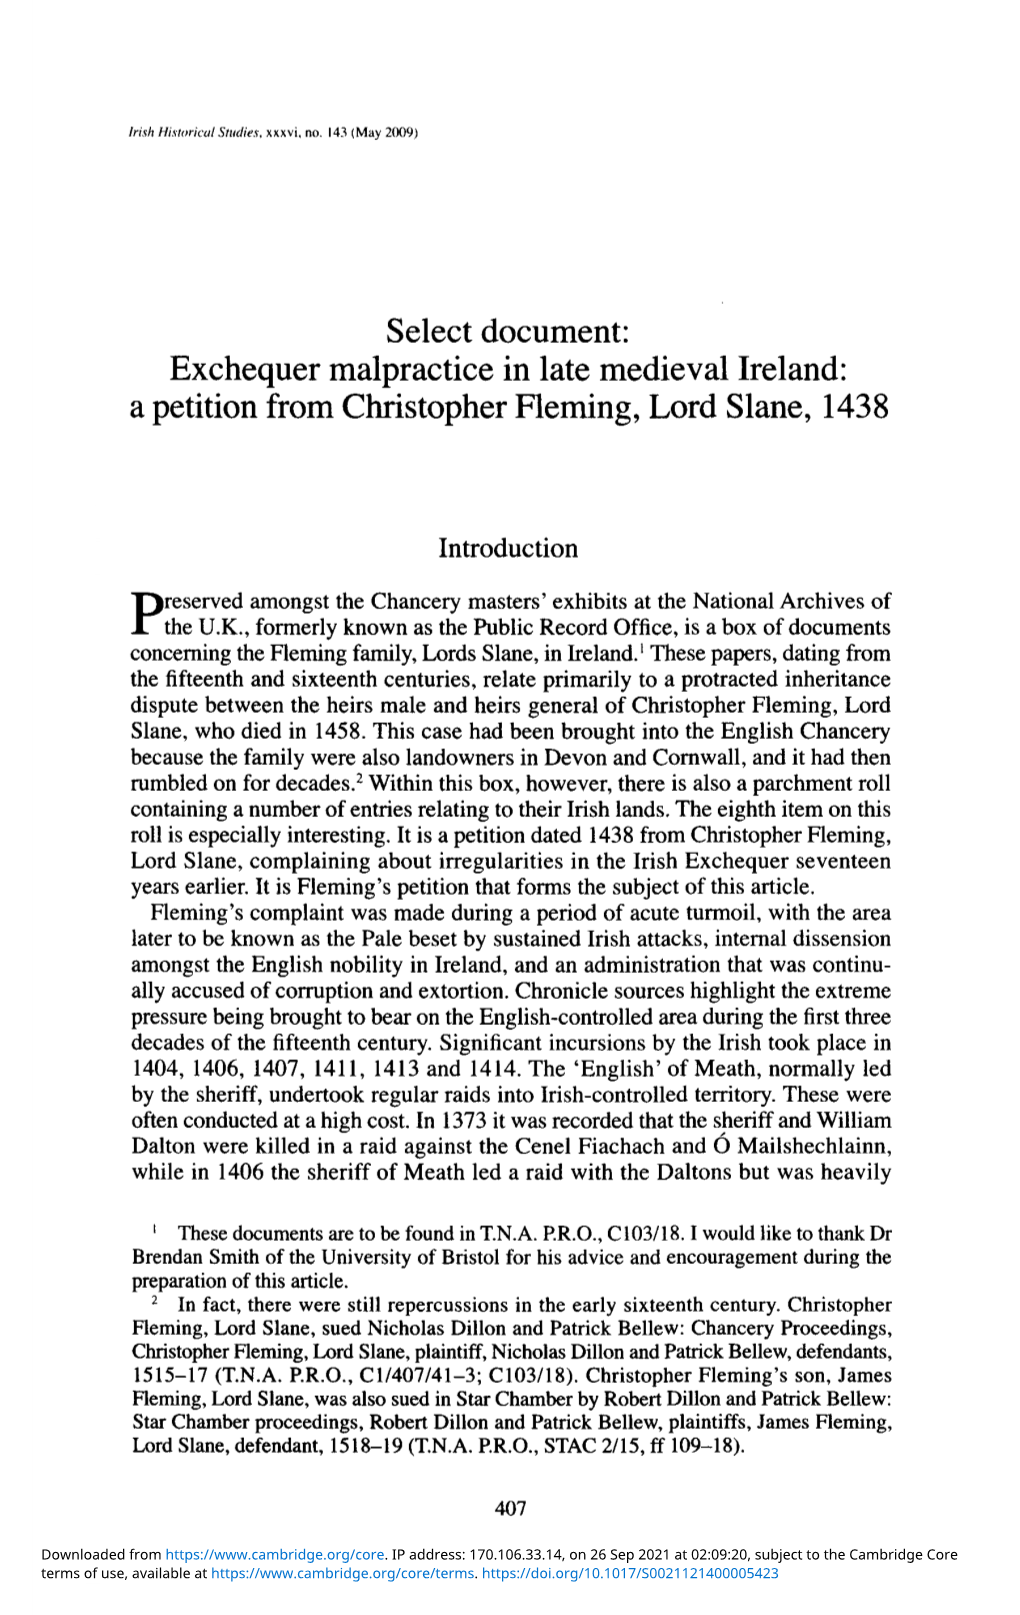 Select Document: Exchequer Malpractice in Late Medieval Ireland: a Petition from Christopher Fleming, Lord Slane, 1438